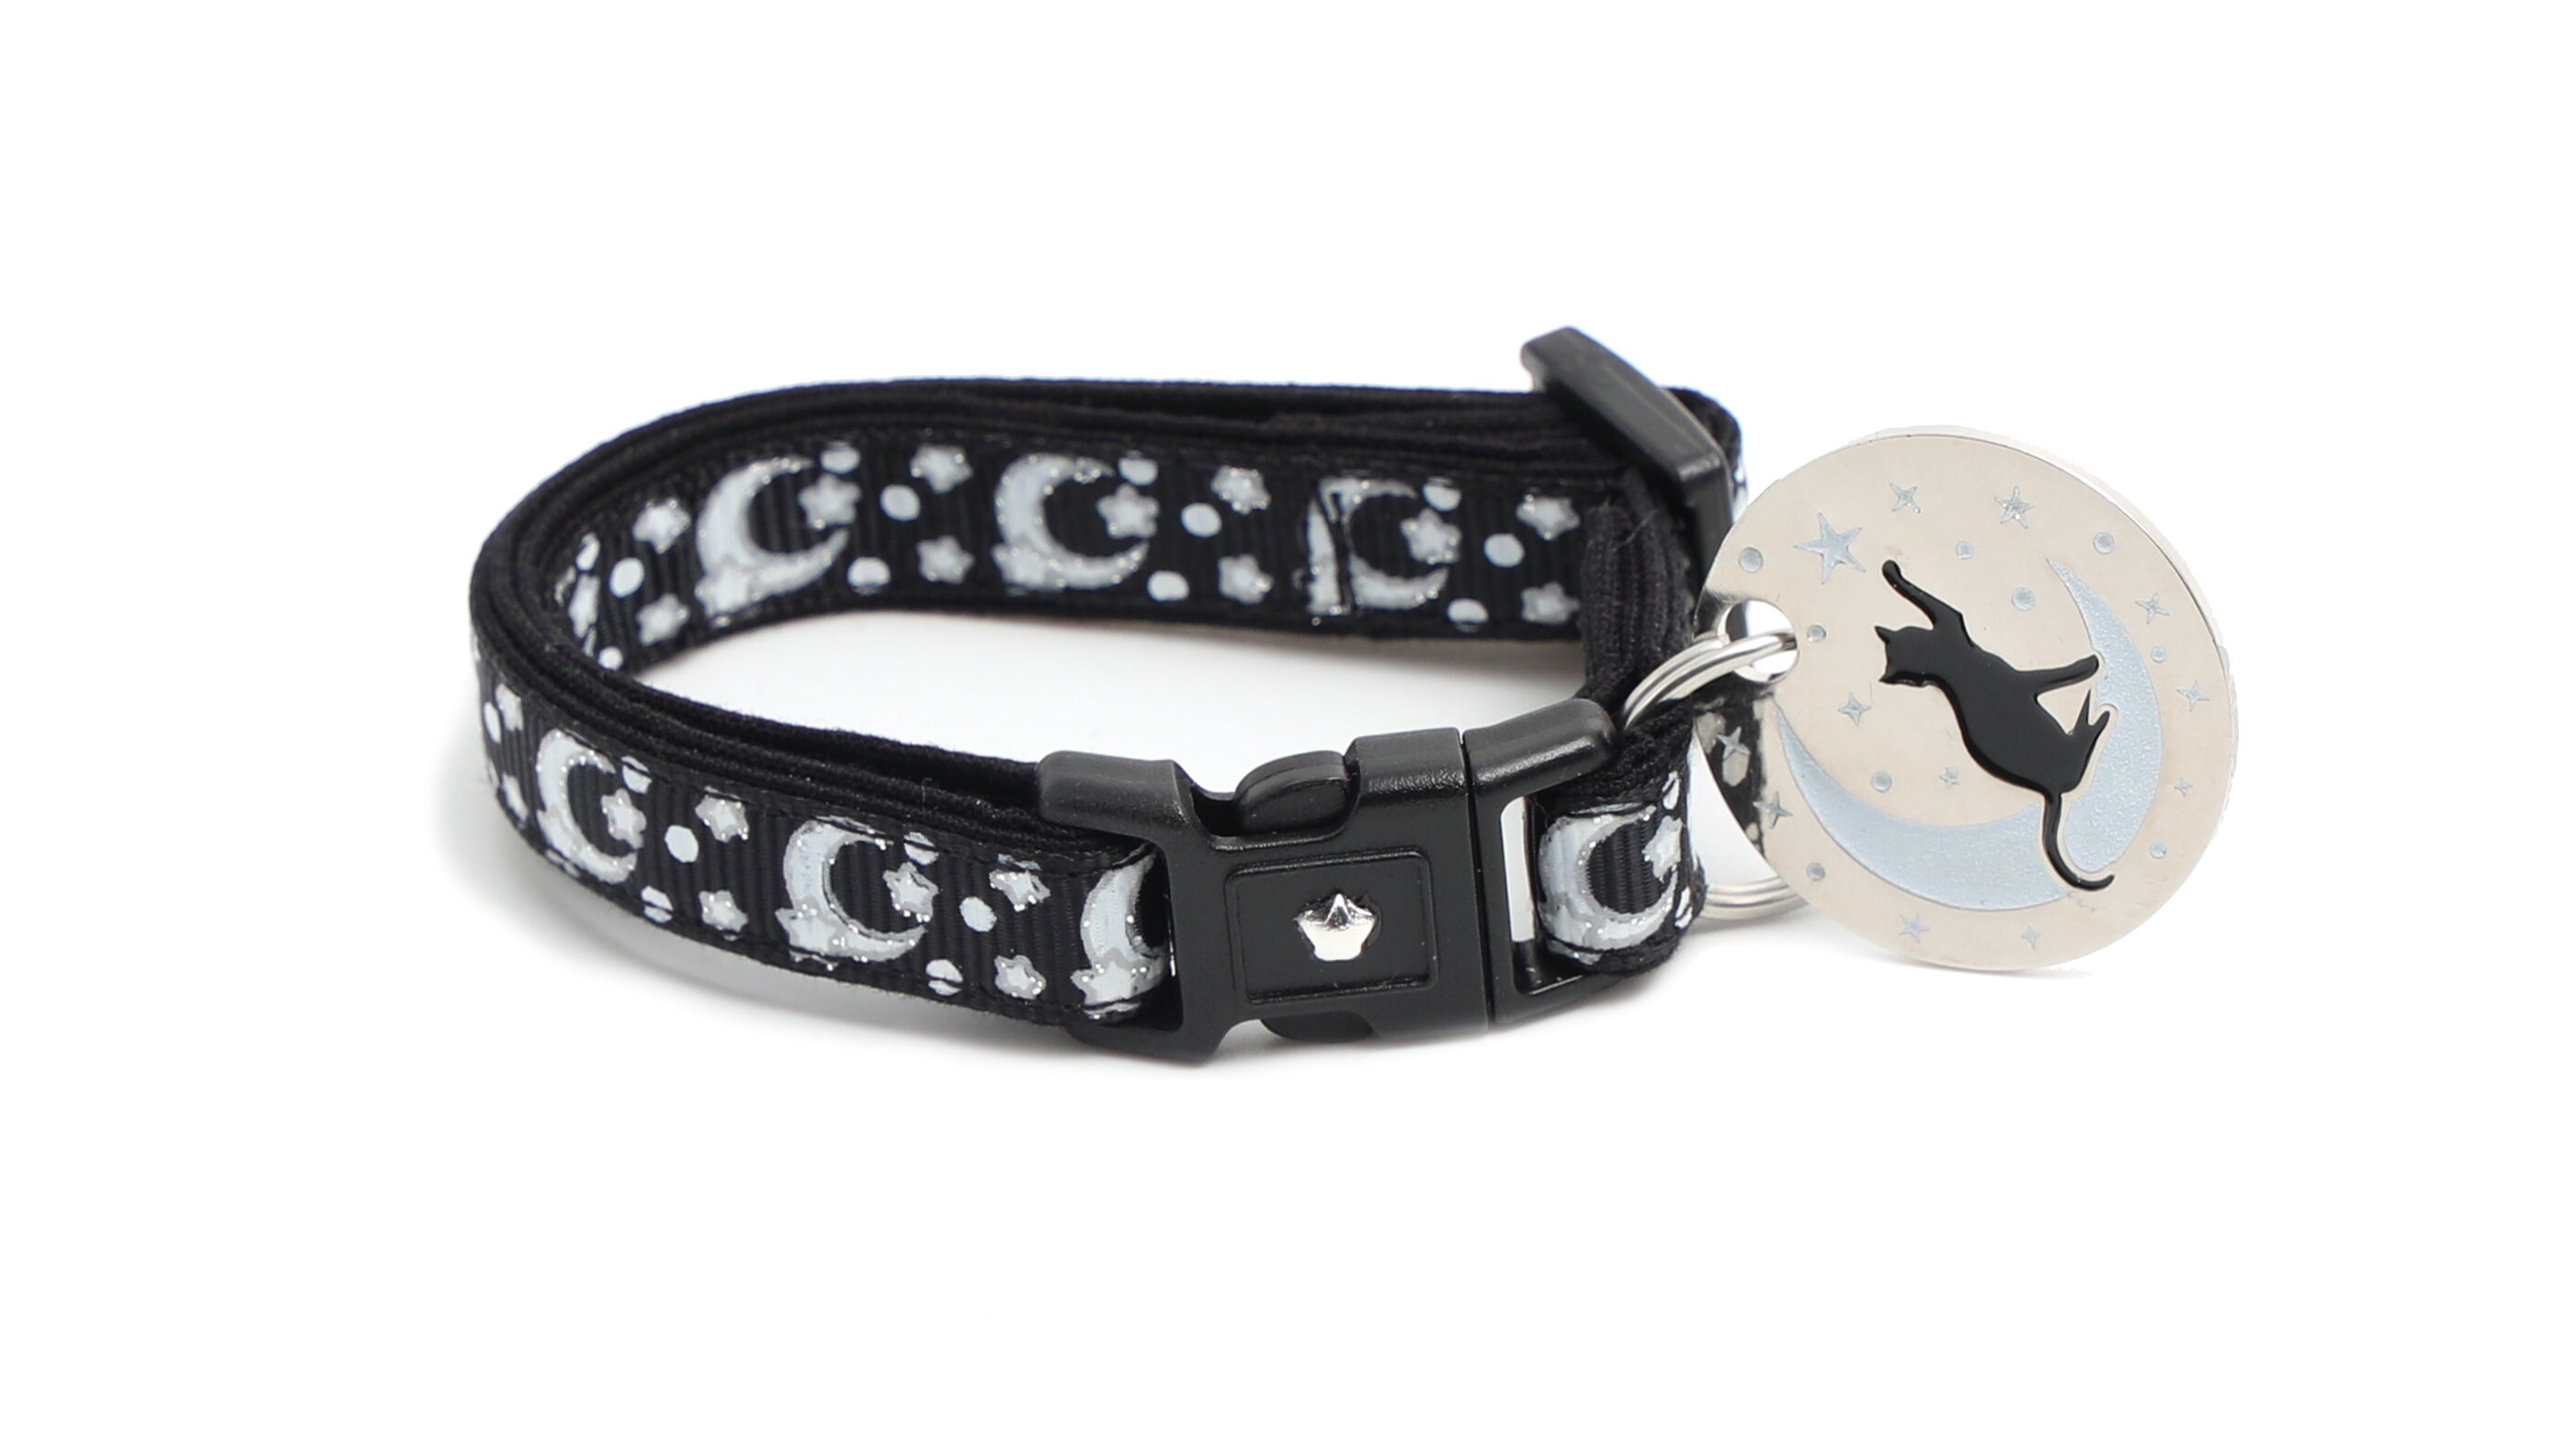 Star Charm Studded Cat Collar Breakaway with Bell,Black Puppy Collars for Small Dogs 